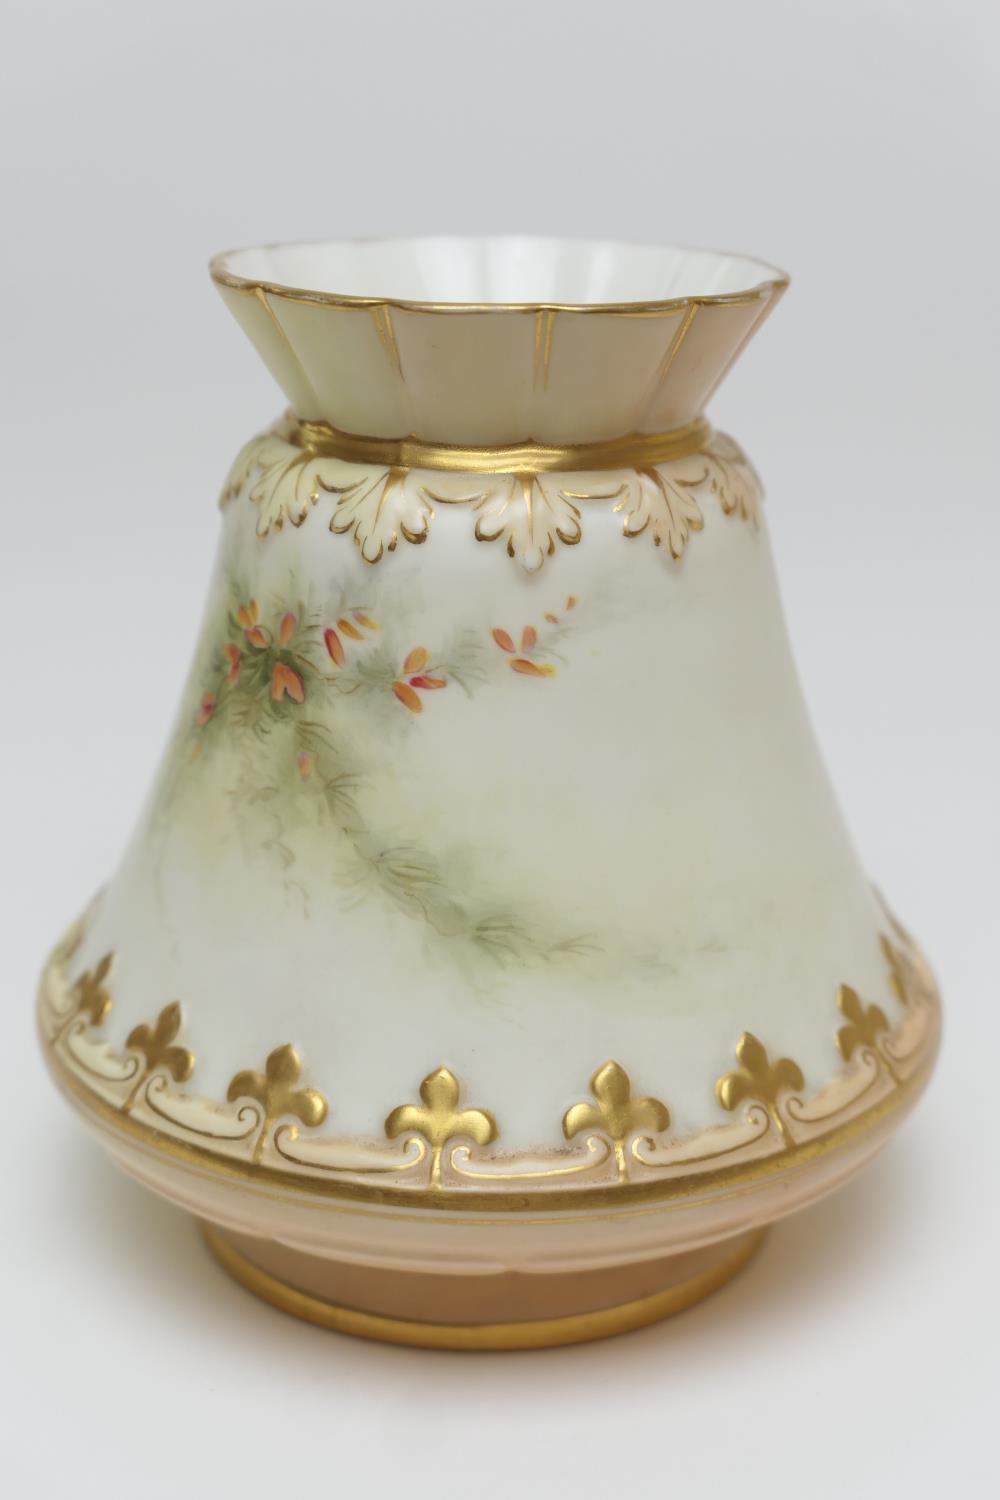 Grainger & Co. Worcester vase, circa 1897, shape G685, decorated with a view of Anne Hathaway's - Image 4 of 15